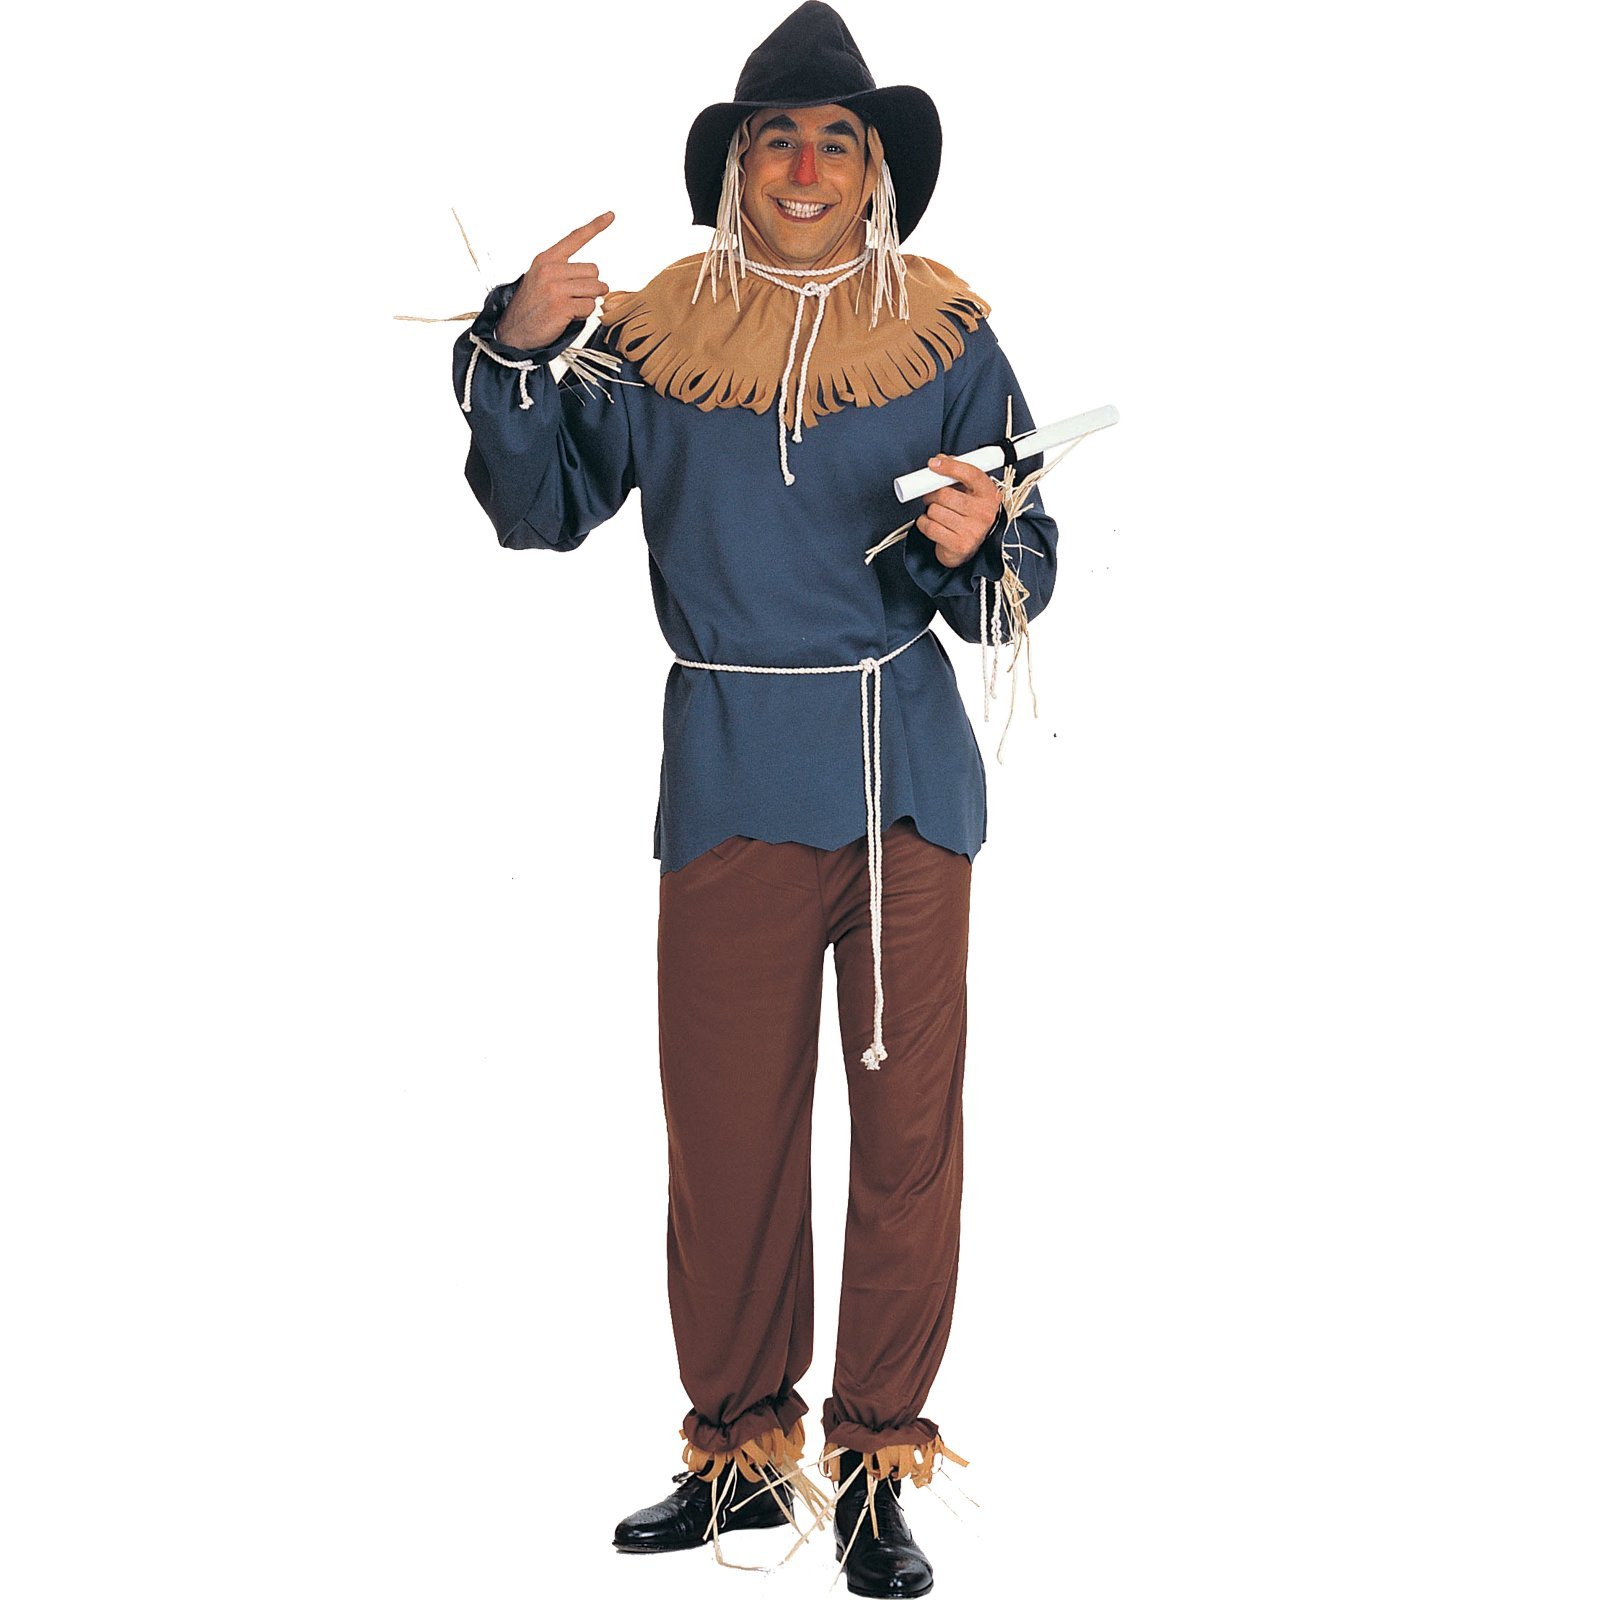 The Wizard of Oz - Scarecrow Plus Adult Costume